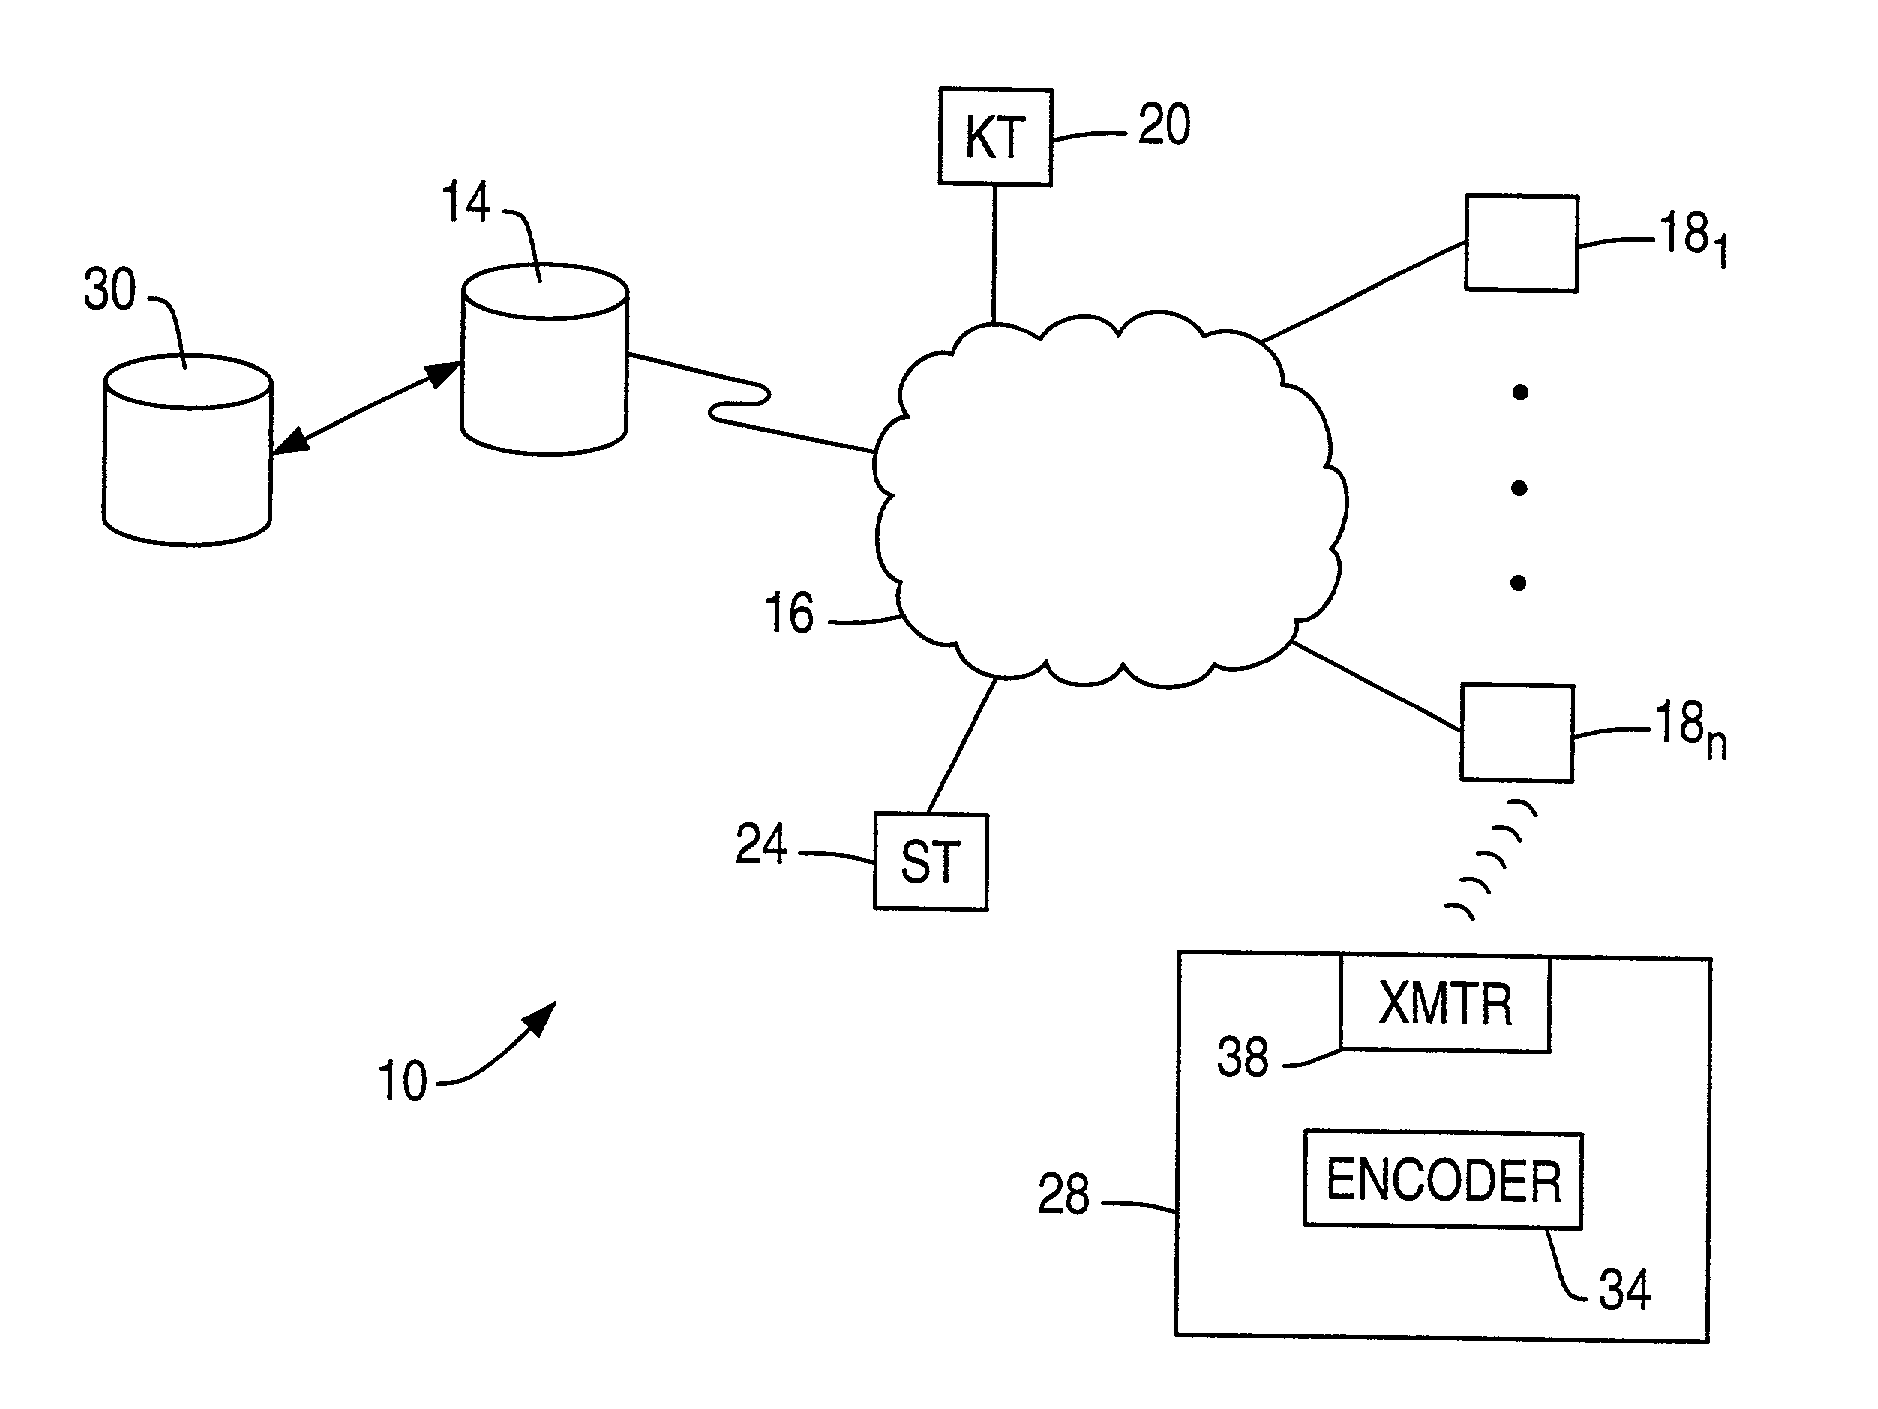 System and method for synchronizing restaurant menu display with progress through a meal